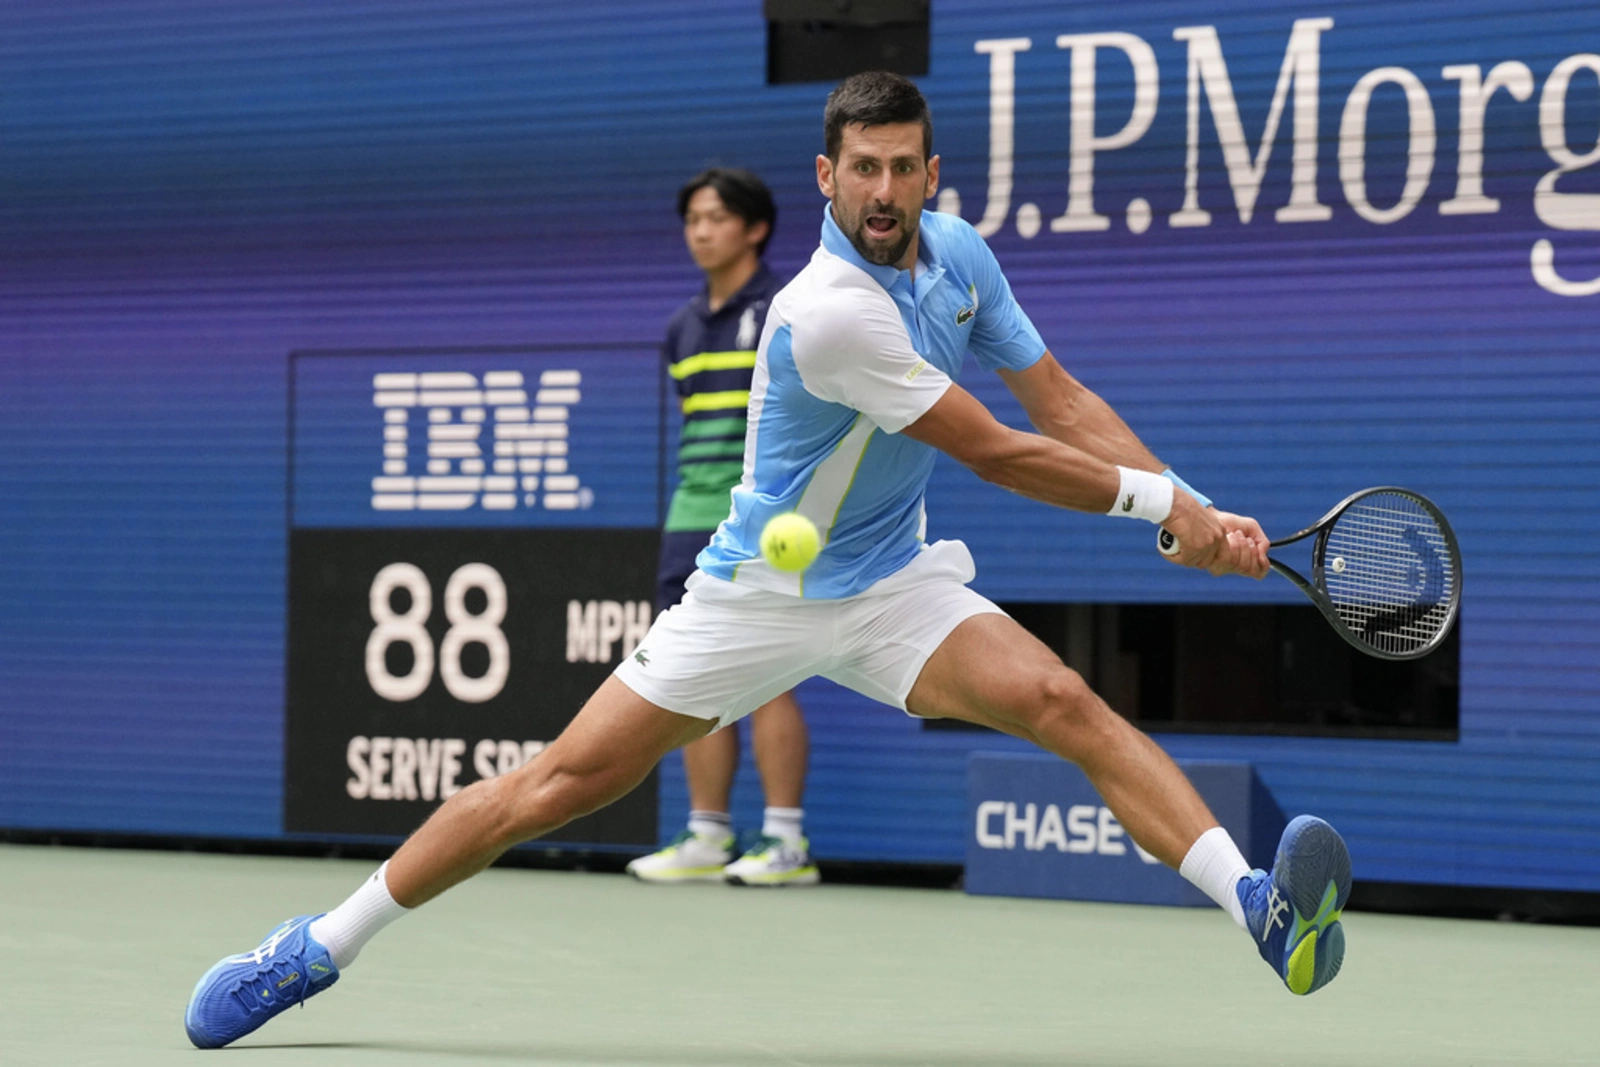 Djokovic ends successful partnership with coach Ivanisevic eNews Malaysia